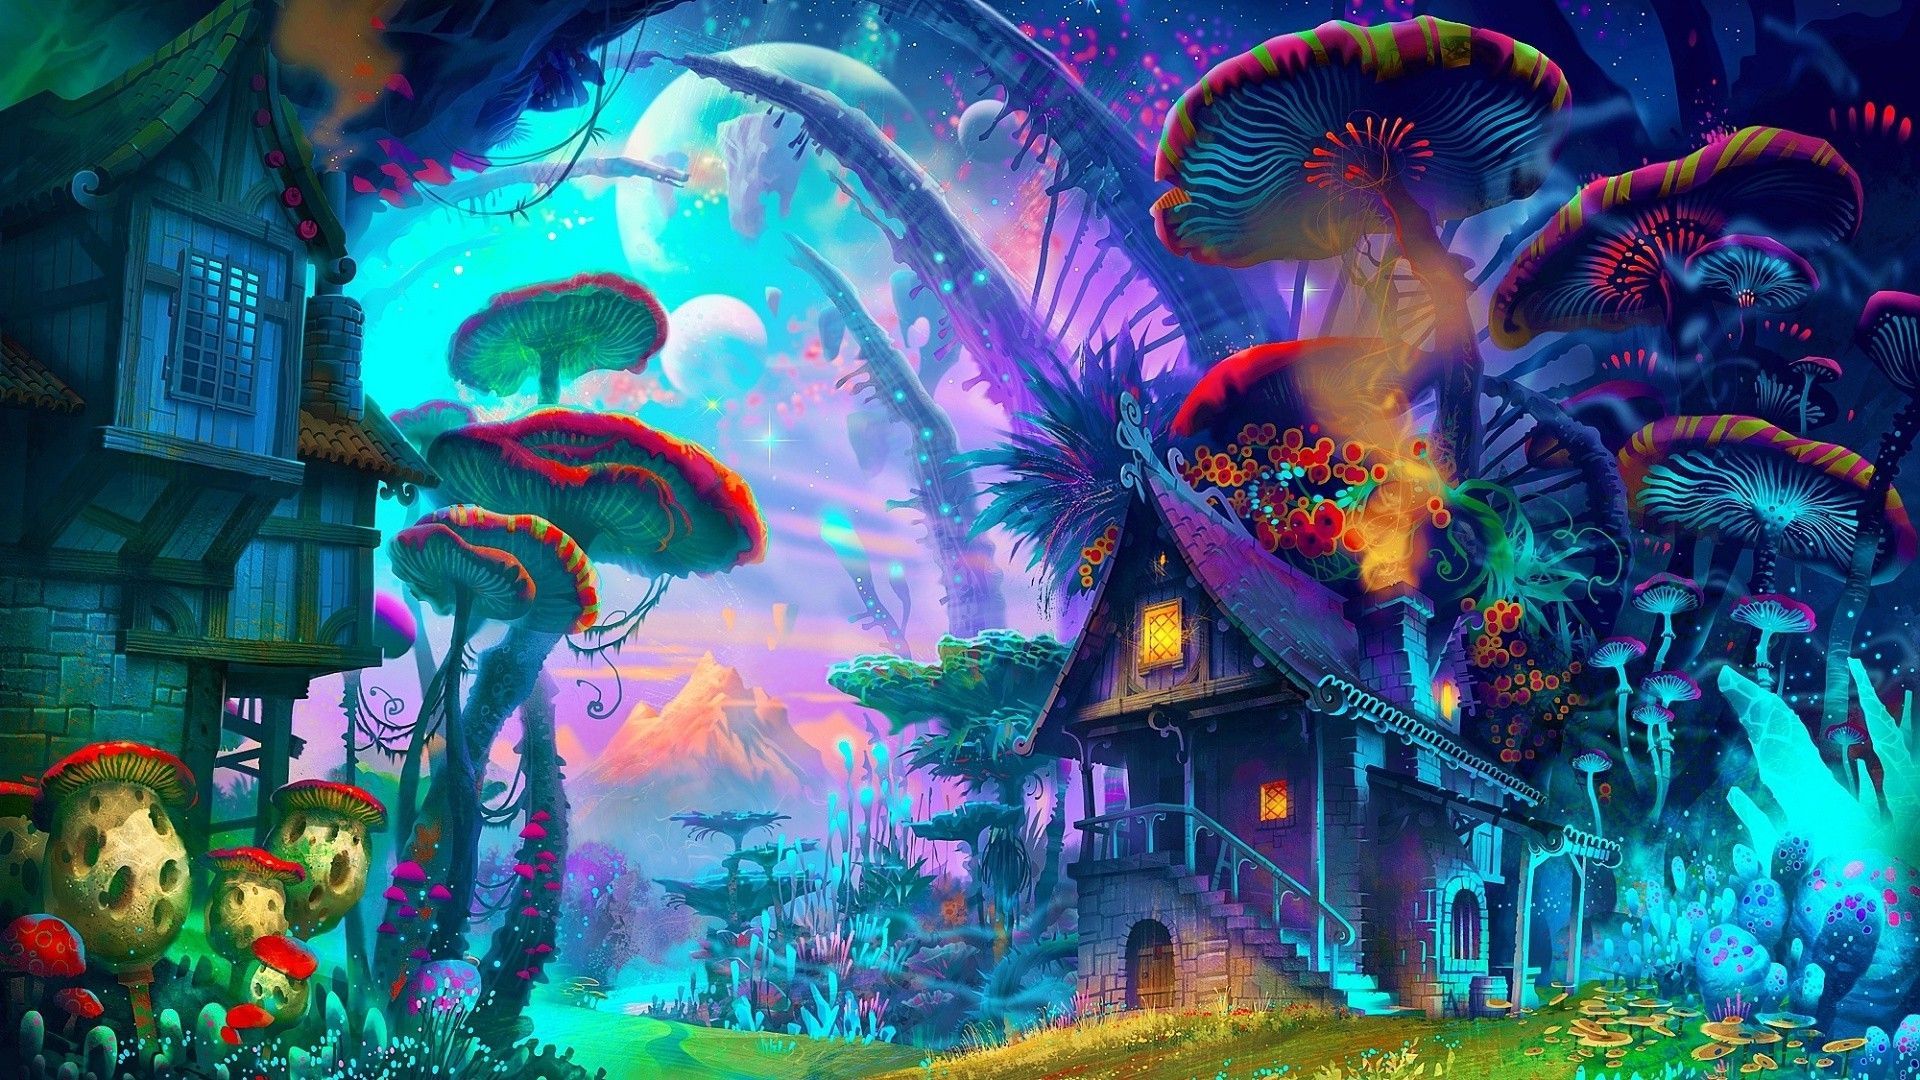 Magic Mushrooms wallpaper by Dravencrow0  Download on ZEDGE  a0d3